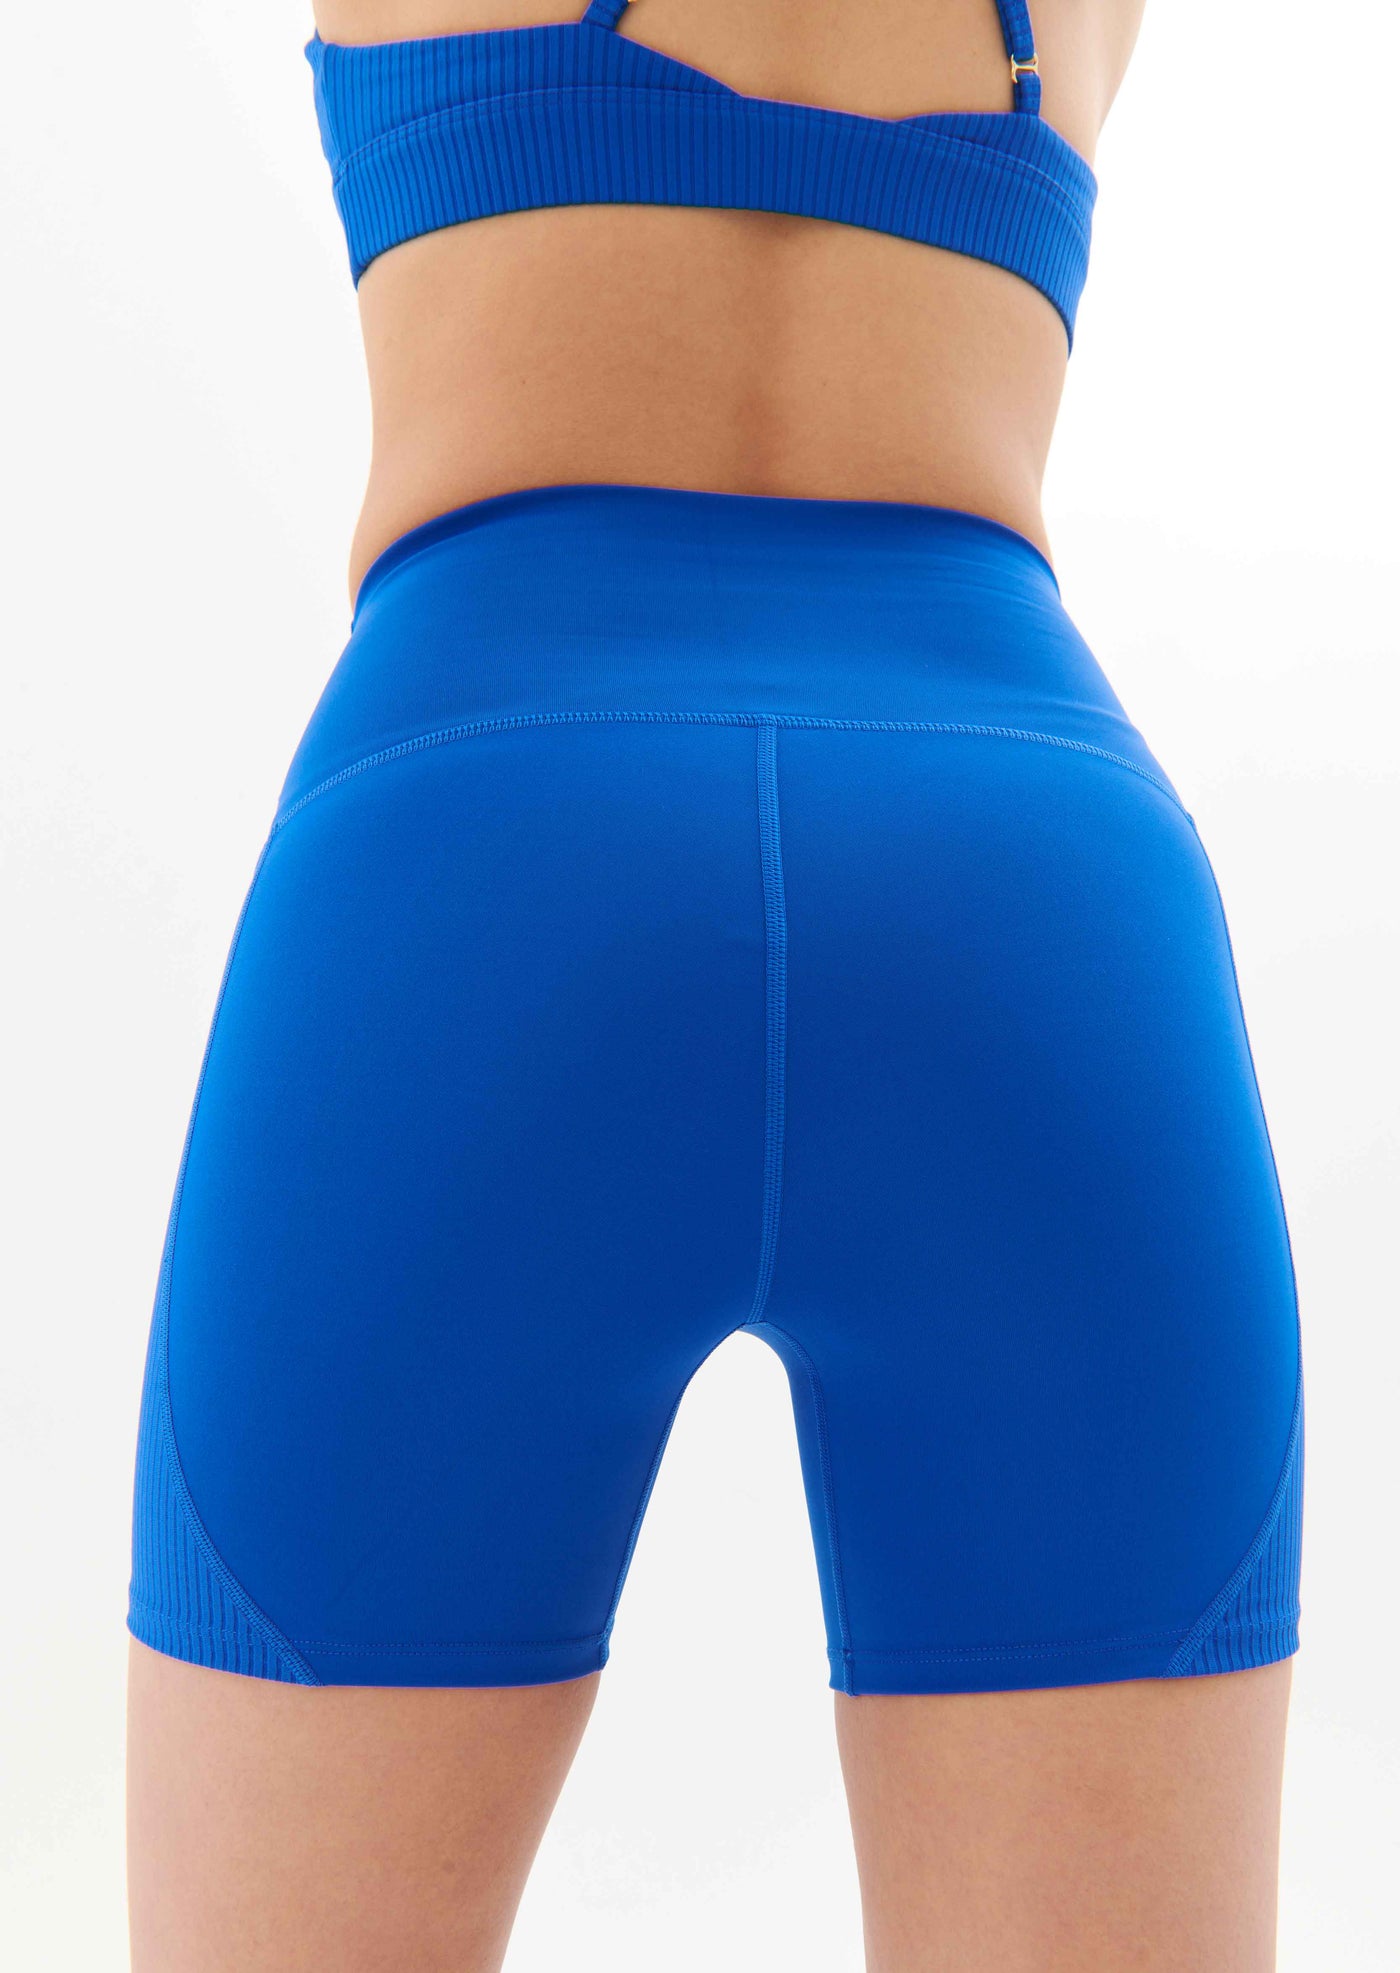 FREE PLAY BIKE SHORT IN ELECTRIC BLUE